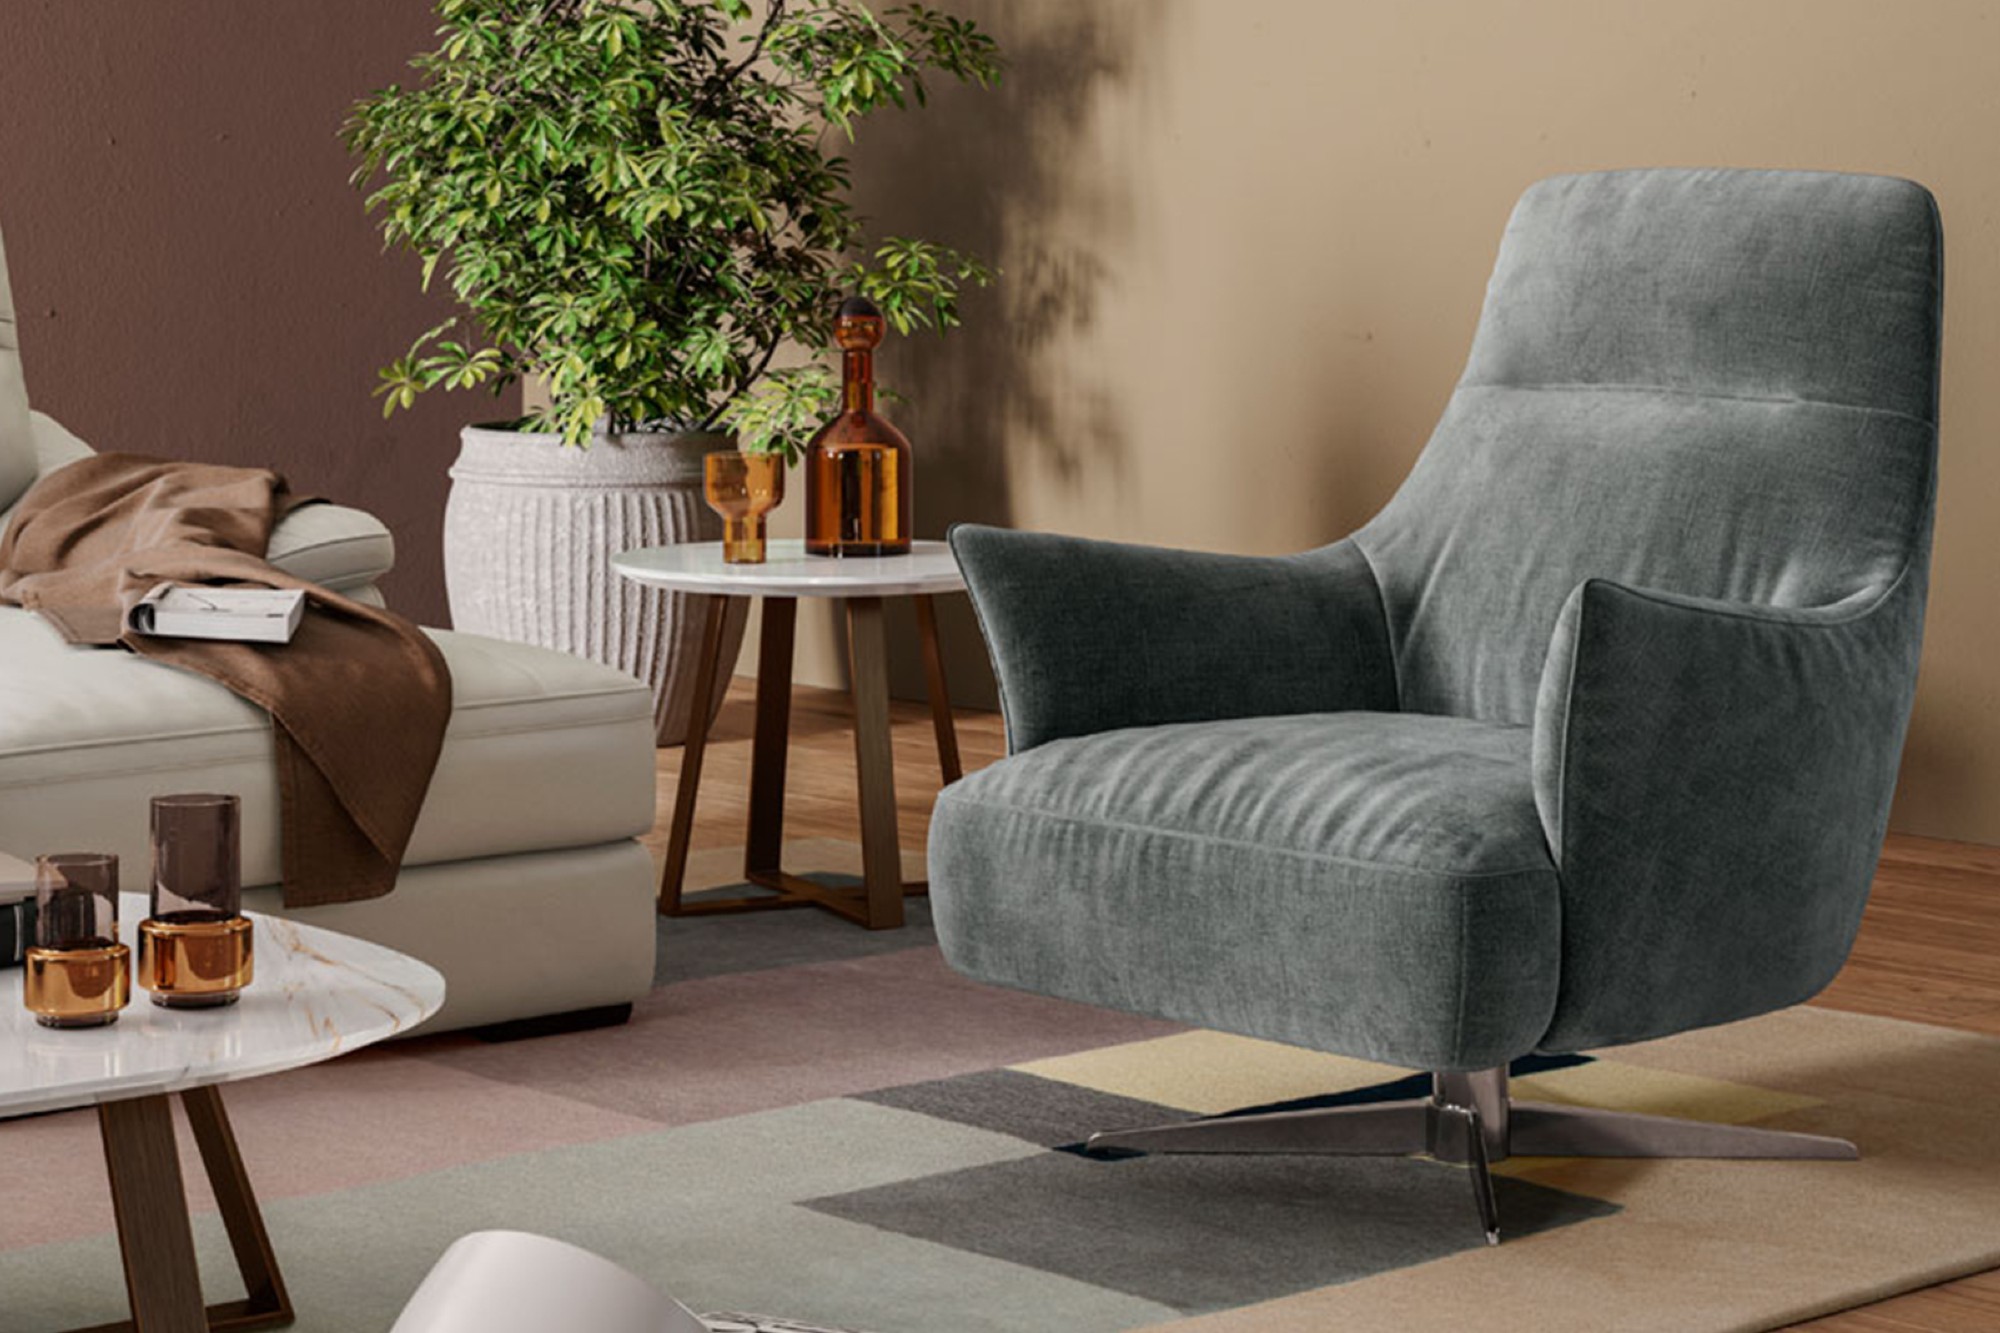 Dash Square introduces an armchair collection